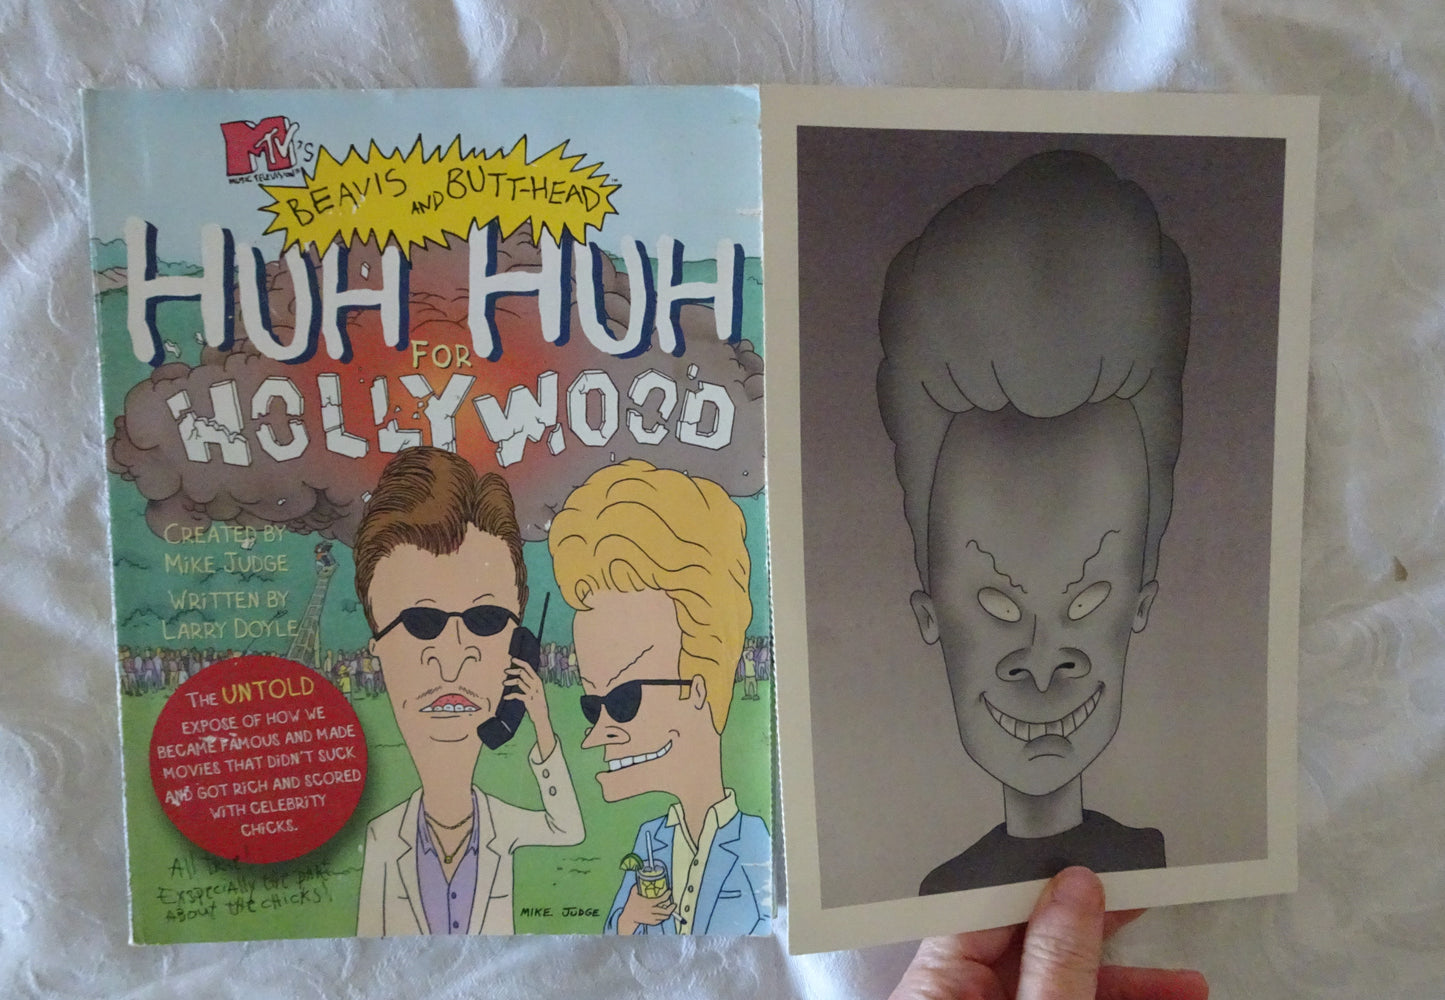 Huh Huh for Hollywood by Mike Judge and Larry Doyle